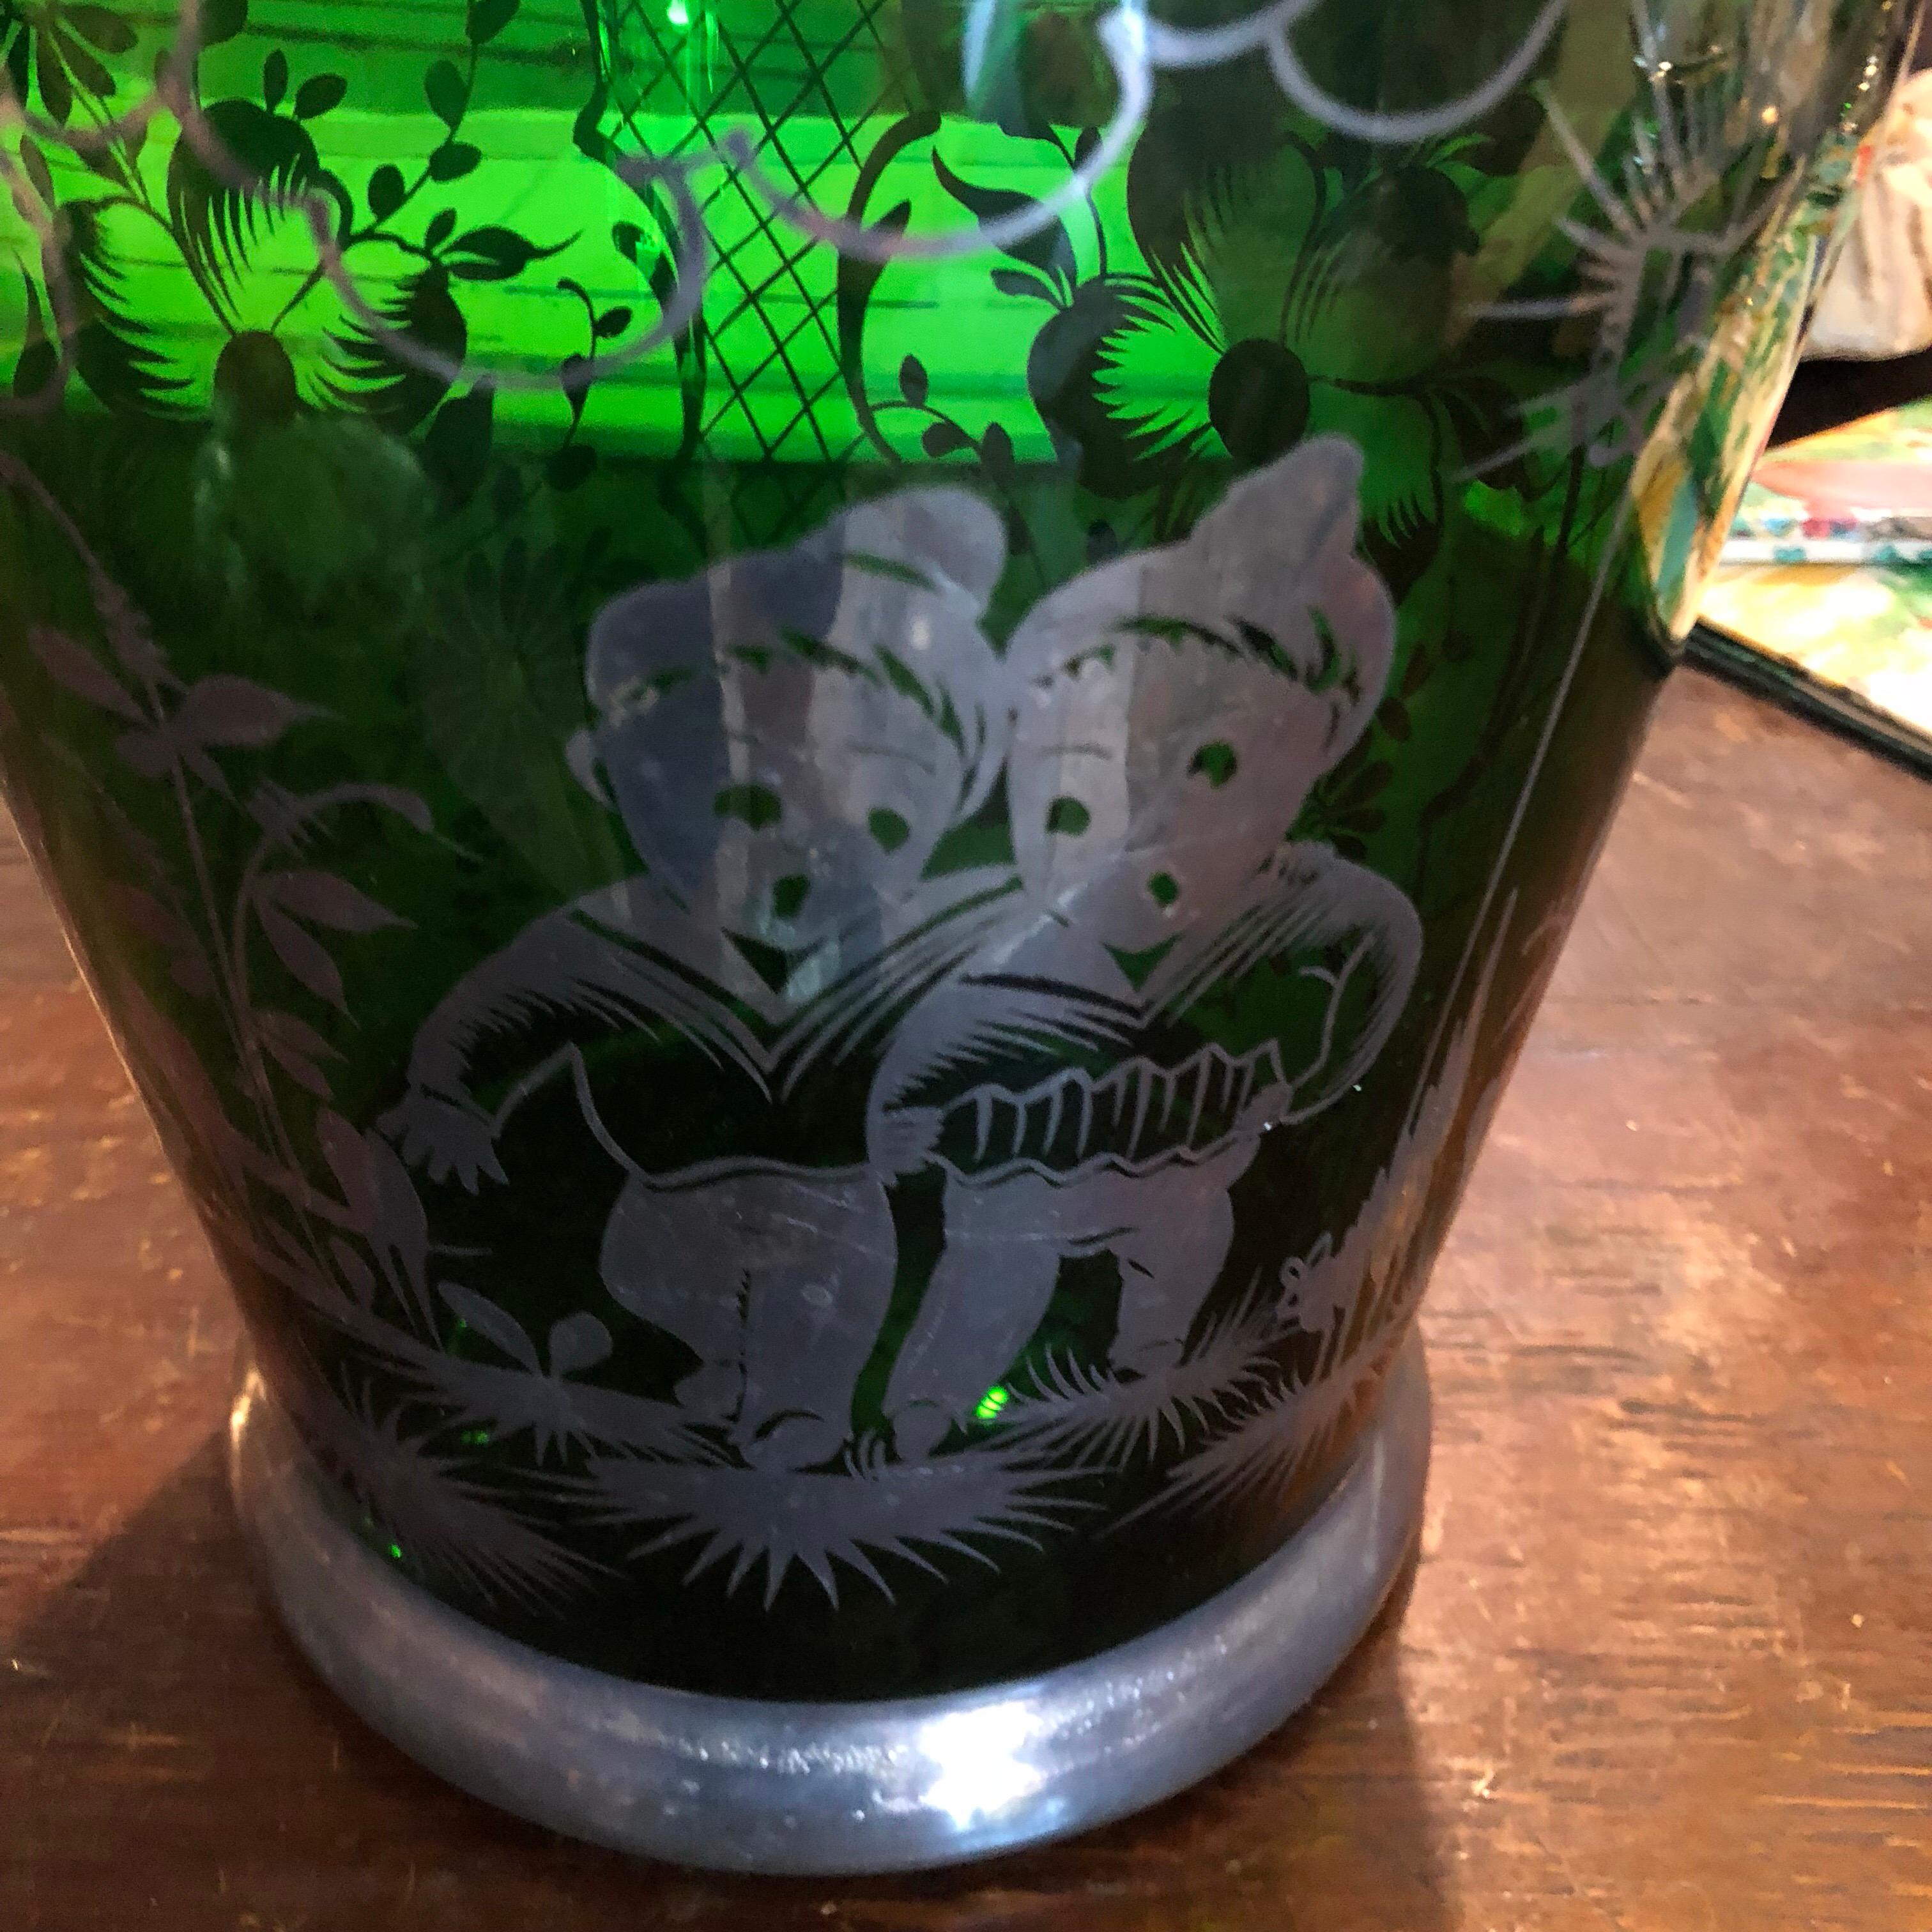 Particular green glass wine cooler, decorations on the glass are in sterling silver, handles and upper edge are in silver plate good conditions overall.